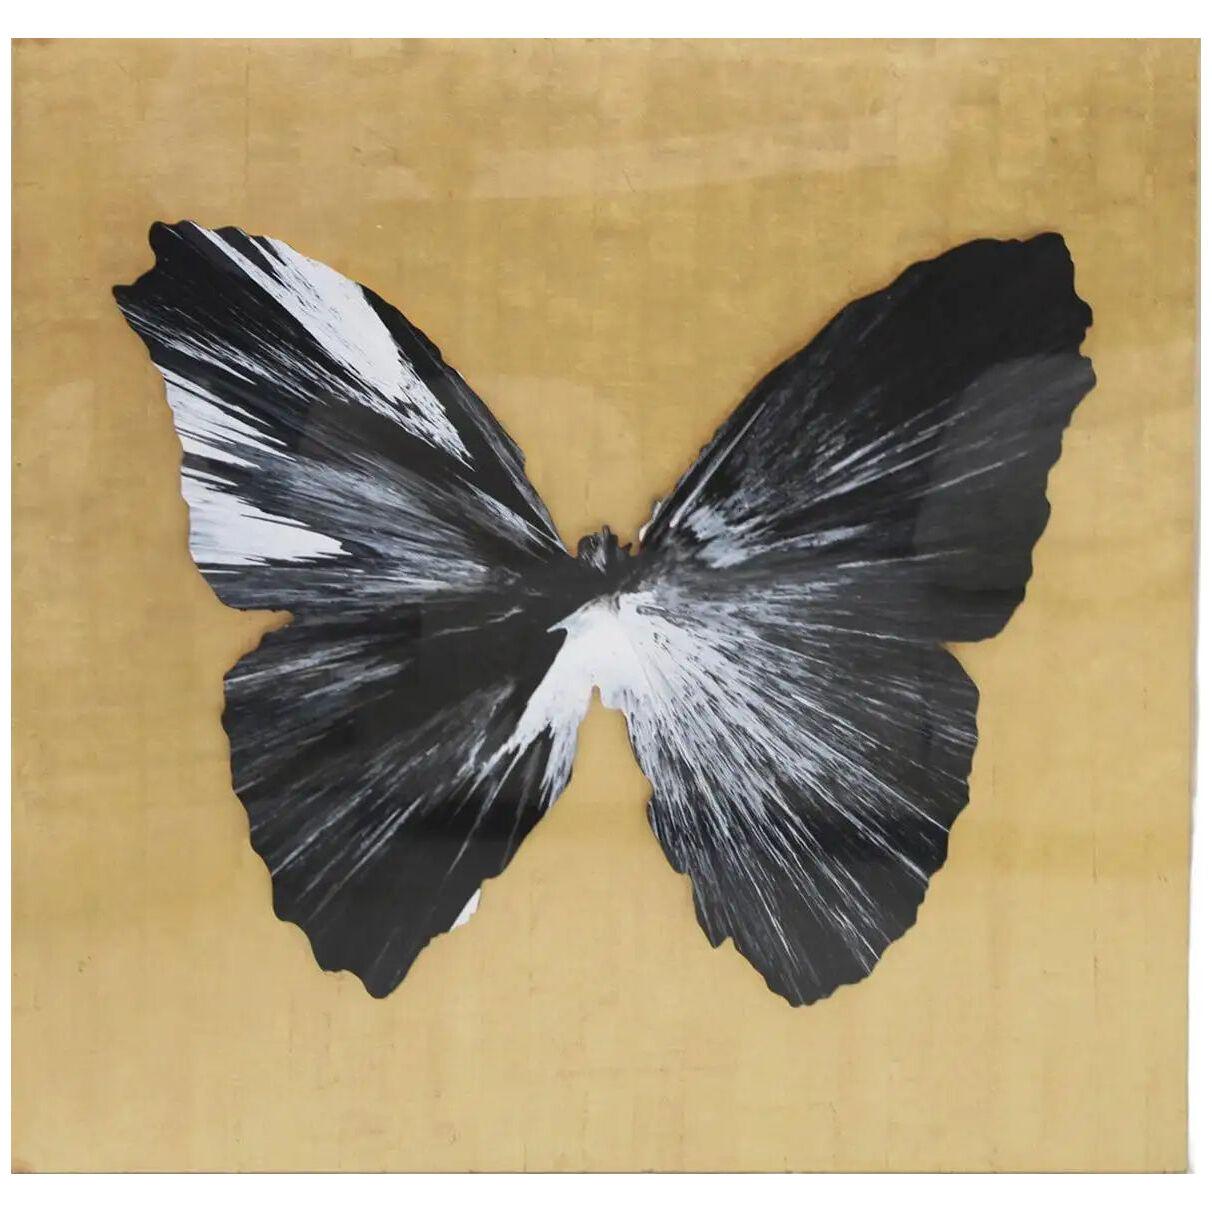 "Butterfly Painting" Damien Hirst, 2009